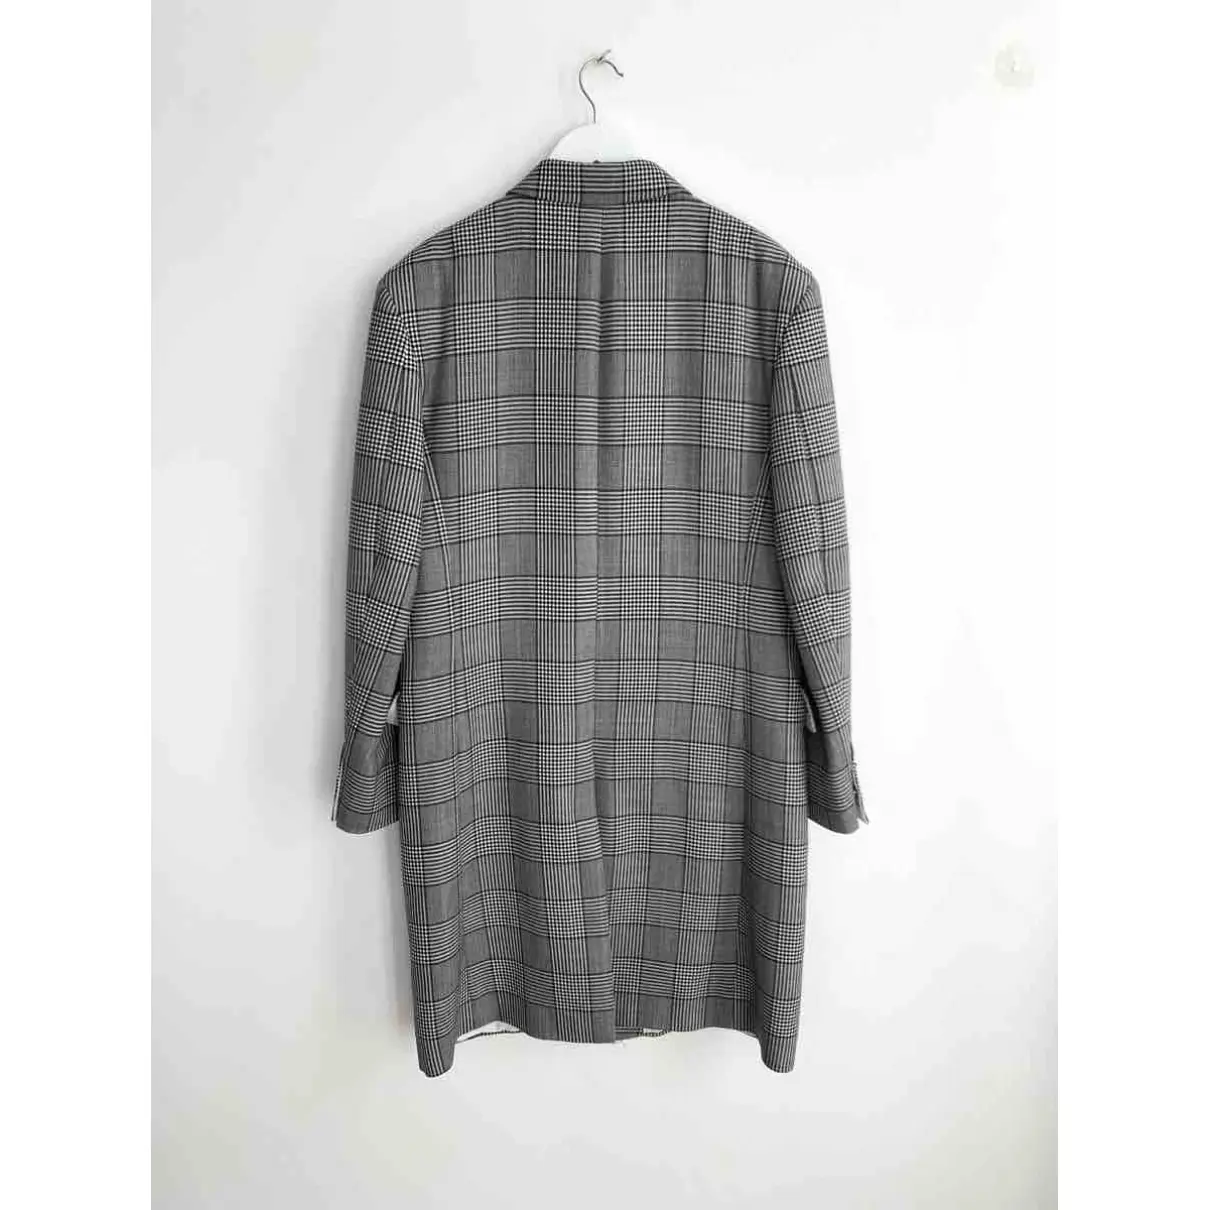 Calvin Klein 205W39NYC Wool coat for sale